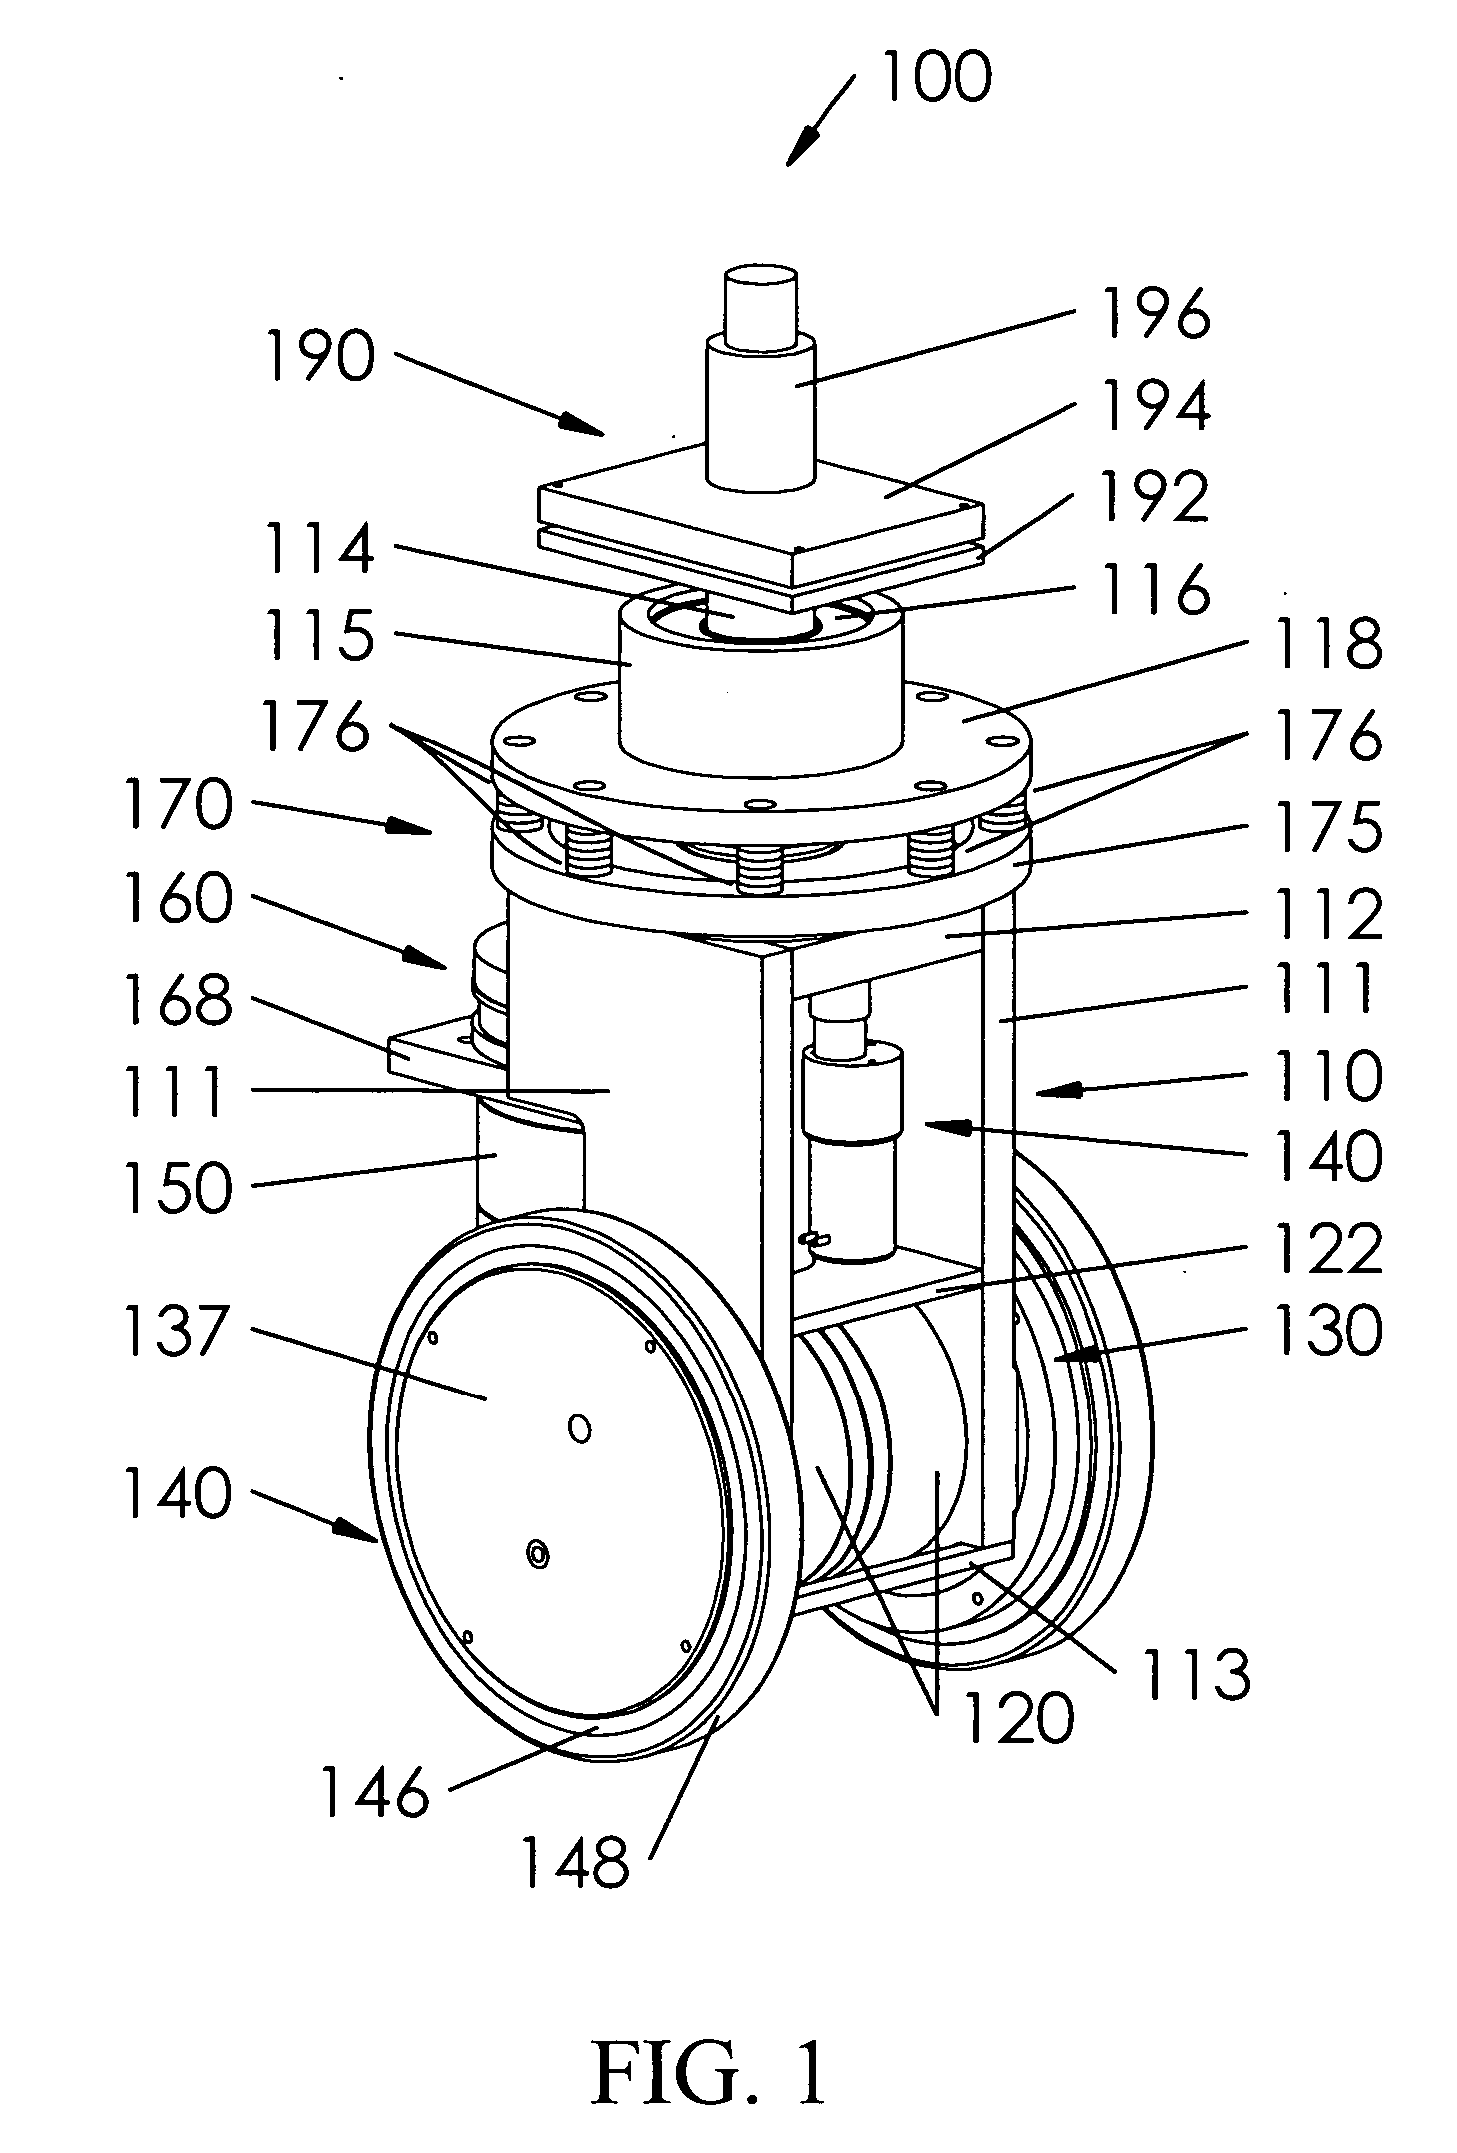 Modular dual wheel drive assembly, wheeled devices that include modular dual wheel drive assemblies and methods for moving and/or maneuvering wheeled devices using modular dual wheel drive assemblies